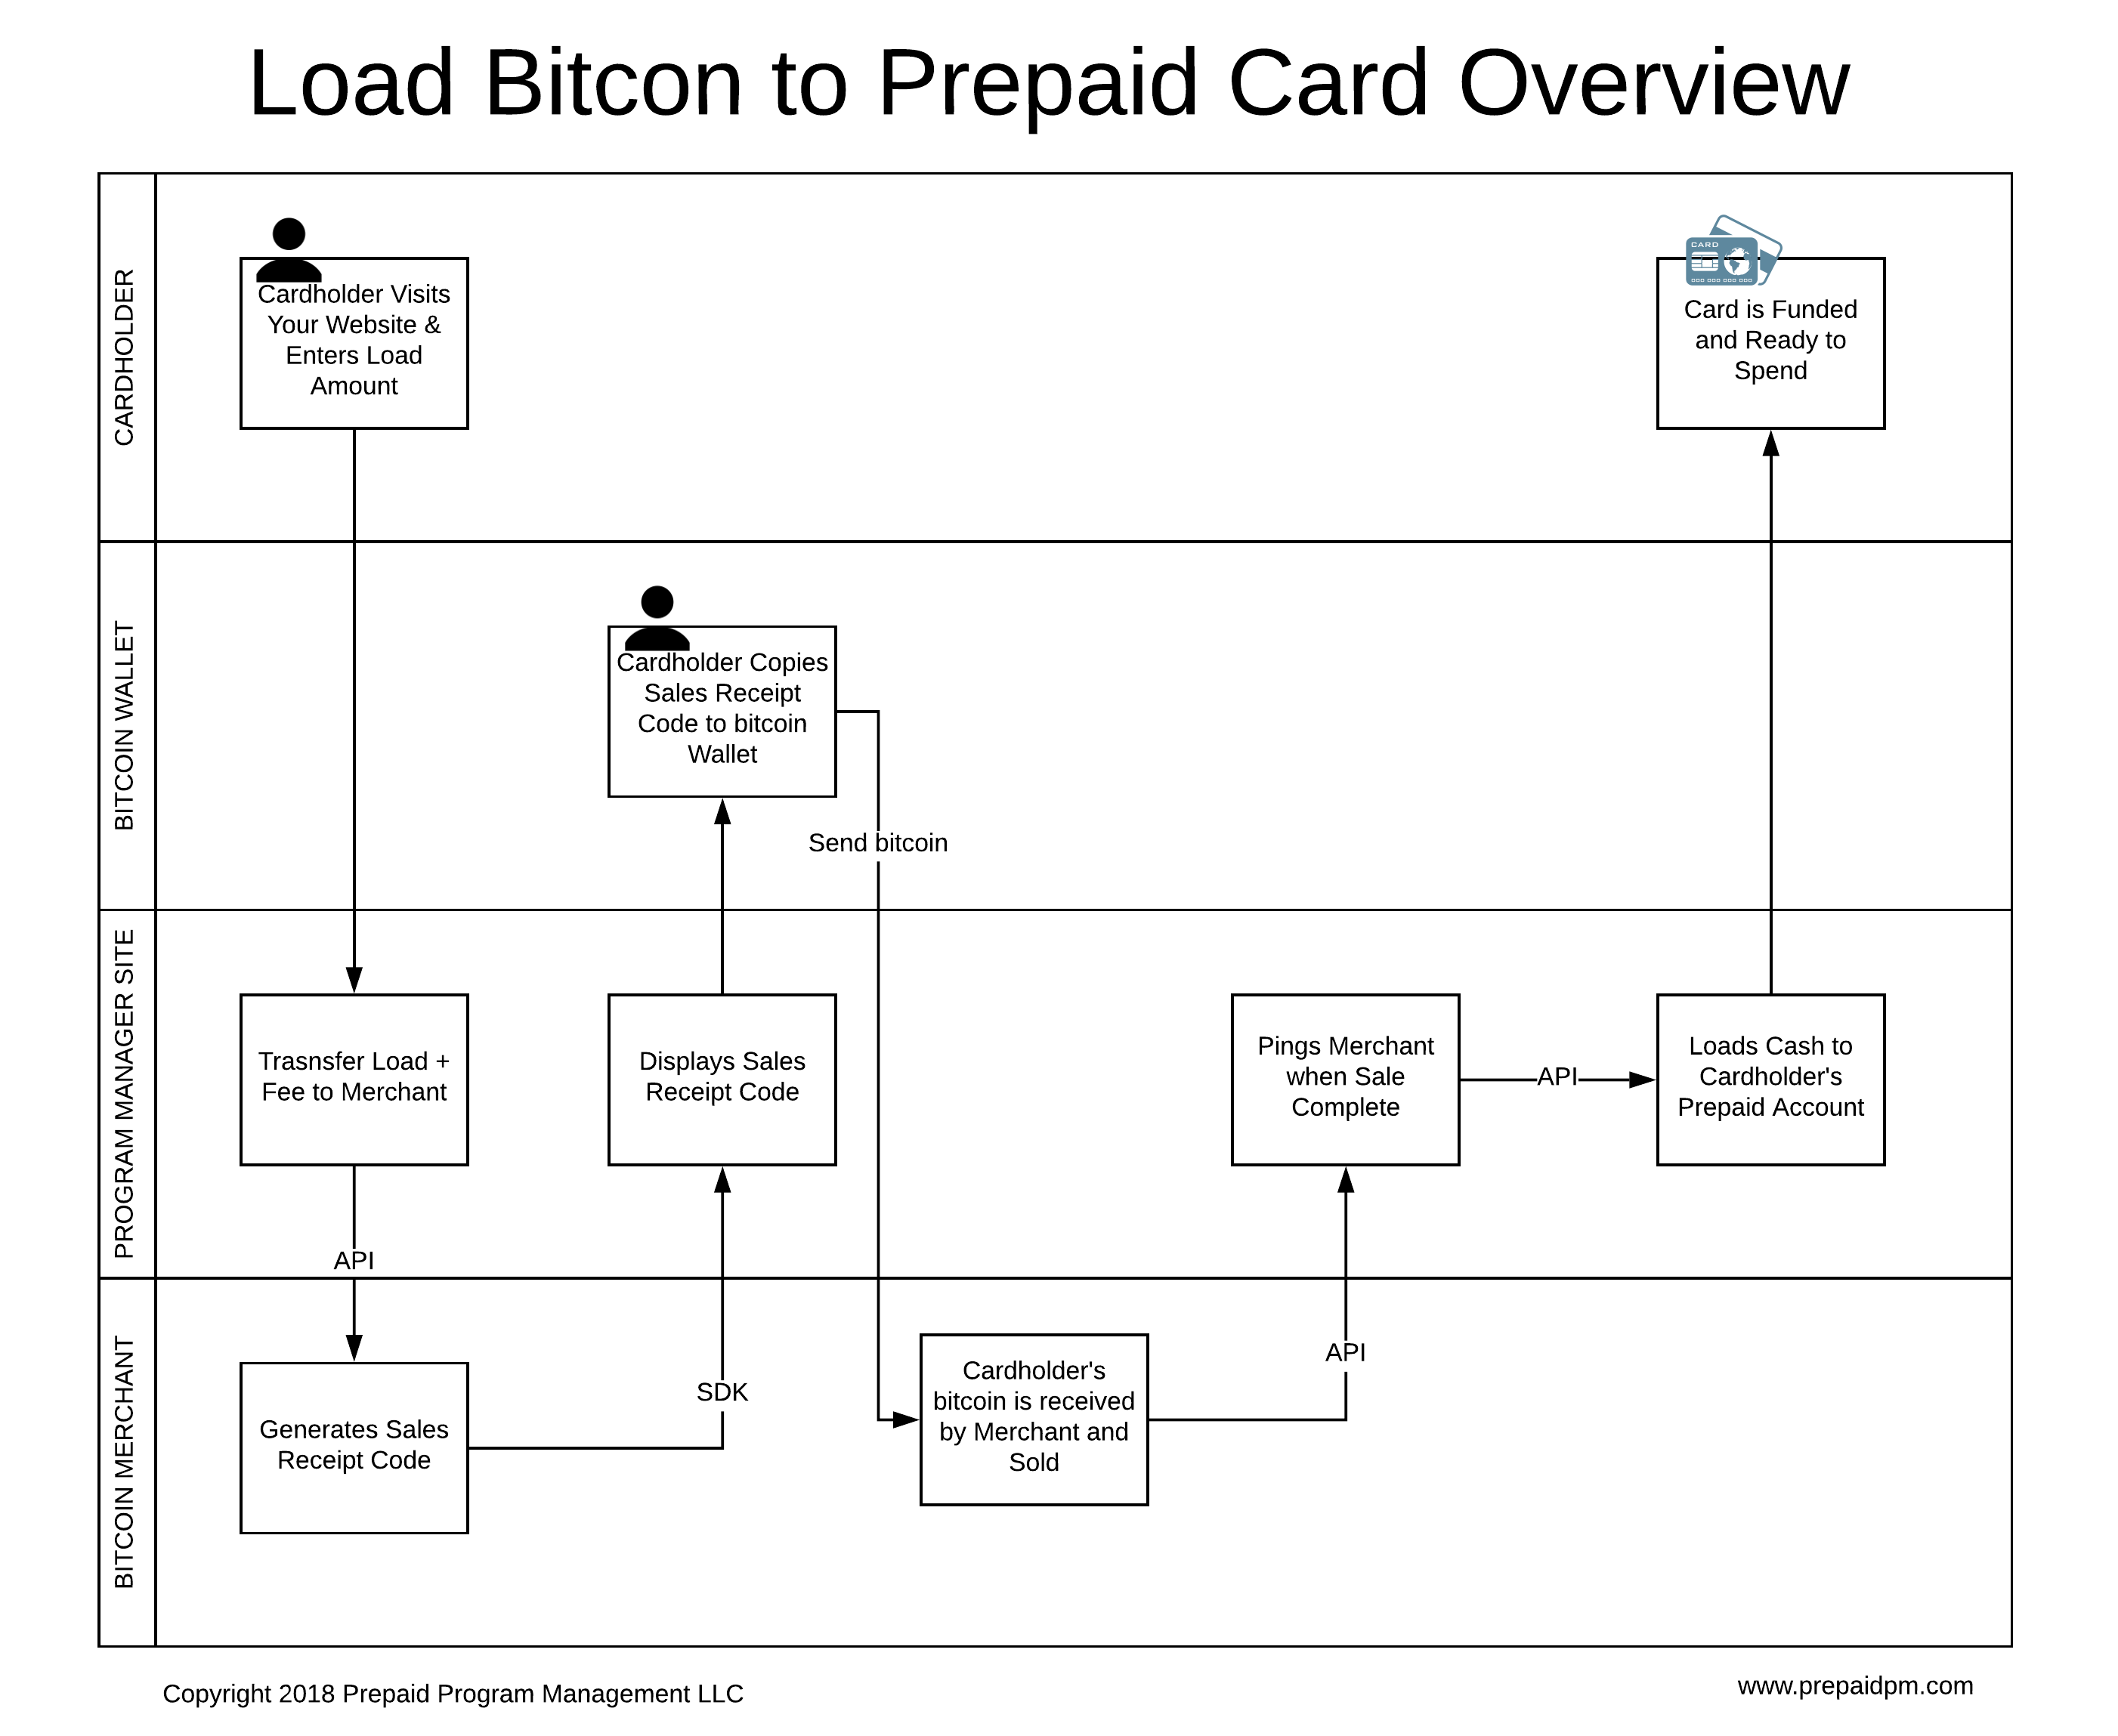 how to get bitcoins with a prepaid card